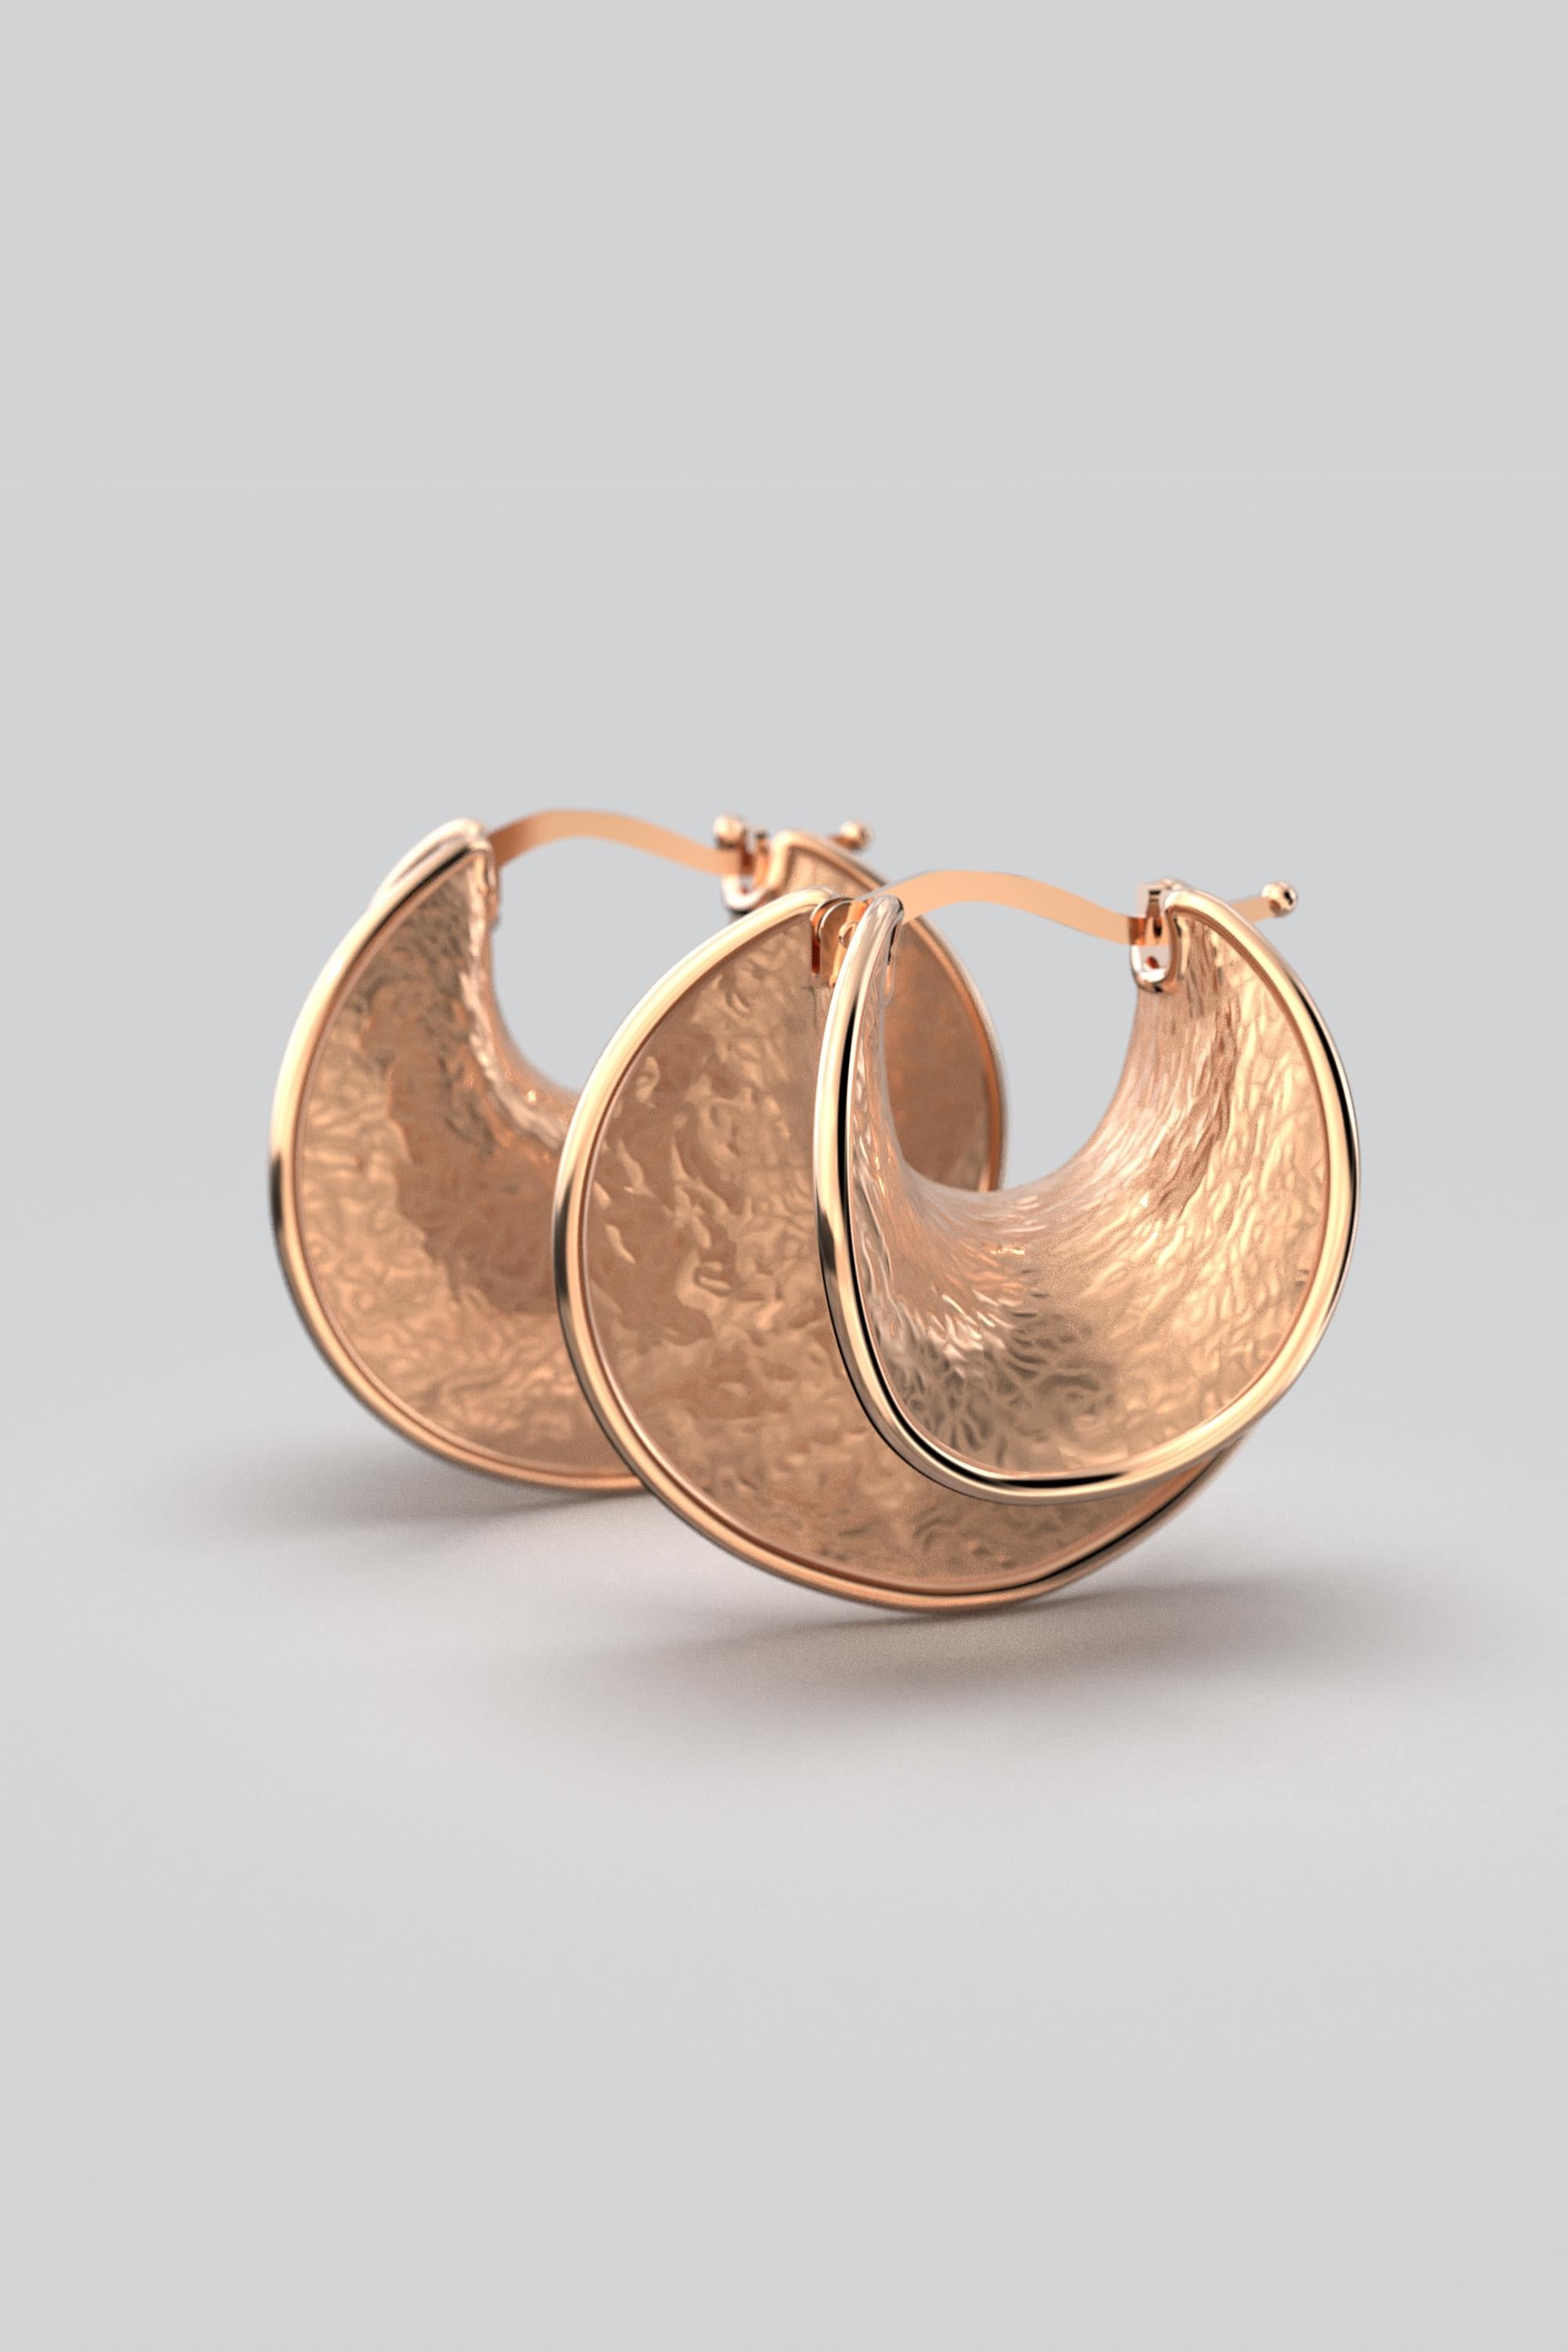 14k Gold Hoop Earrings Made in Italy by Oltremare Gioielli In New Condition For Sale In Camisano Vicentino, VI